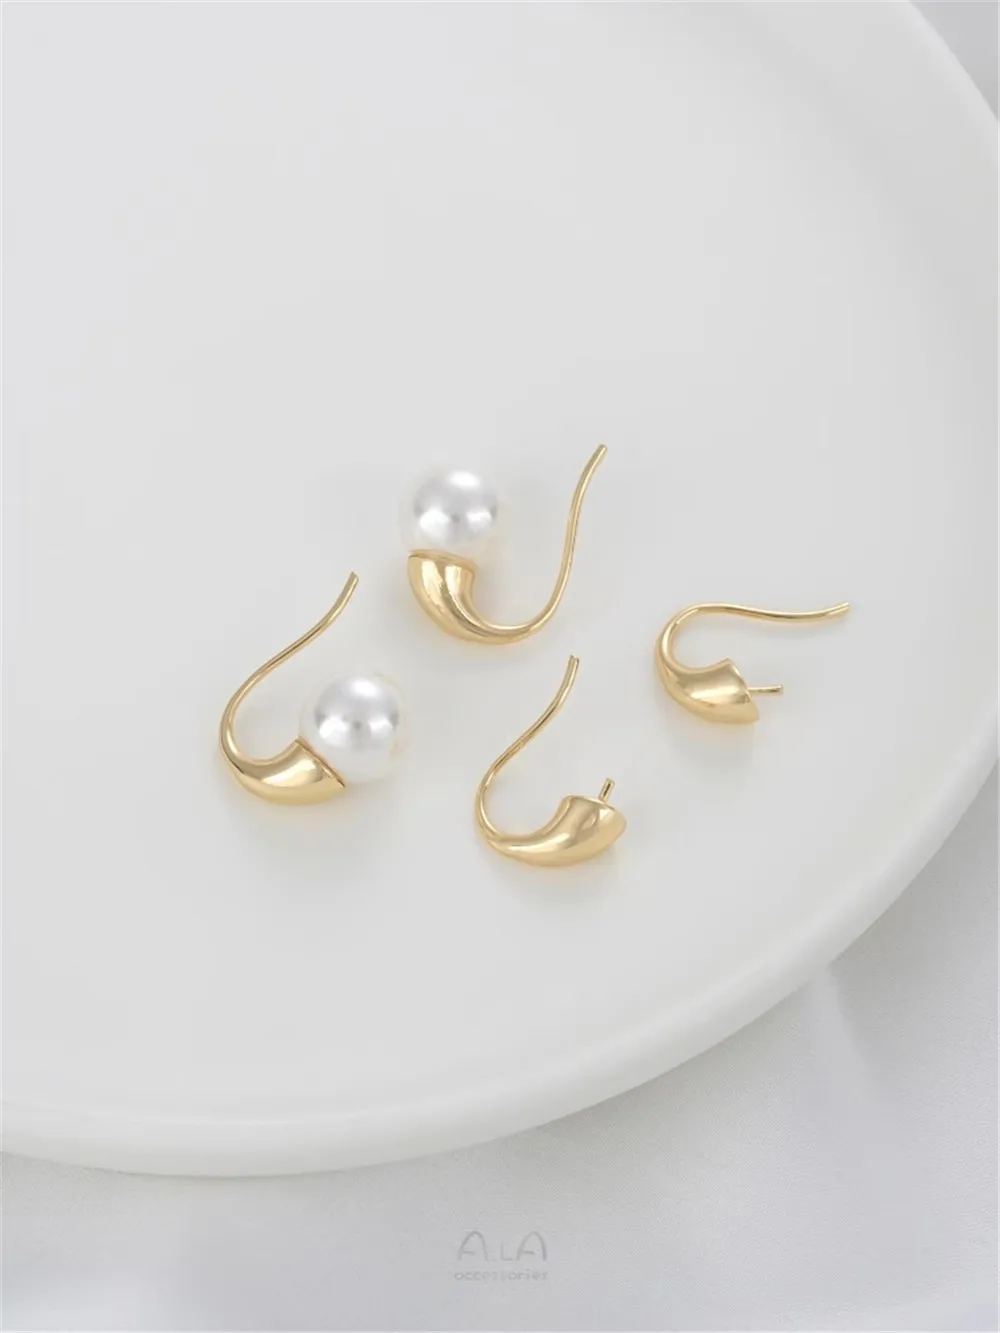 14K Gold Package Droplet Shaped Bead Ear Hook DIY Handmade Adhesive Pearl Earrings Ear Jewelry Accessories Material E357 50pcs necklace chain adhesive pouch for diy jewelry making necklace packing card self adhesive chain pocket 4 2x3 7